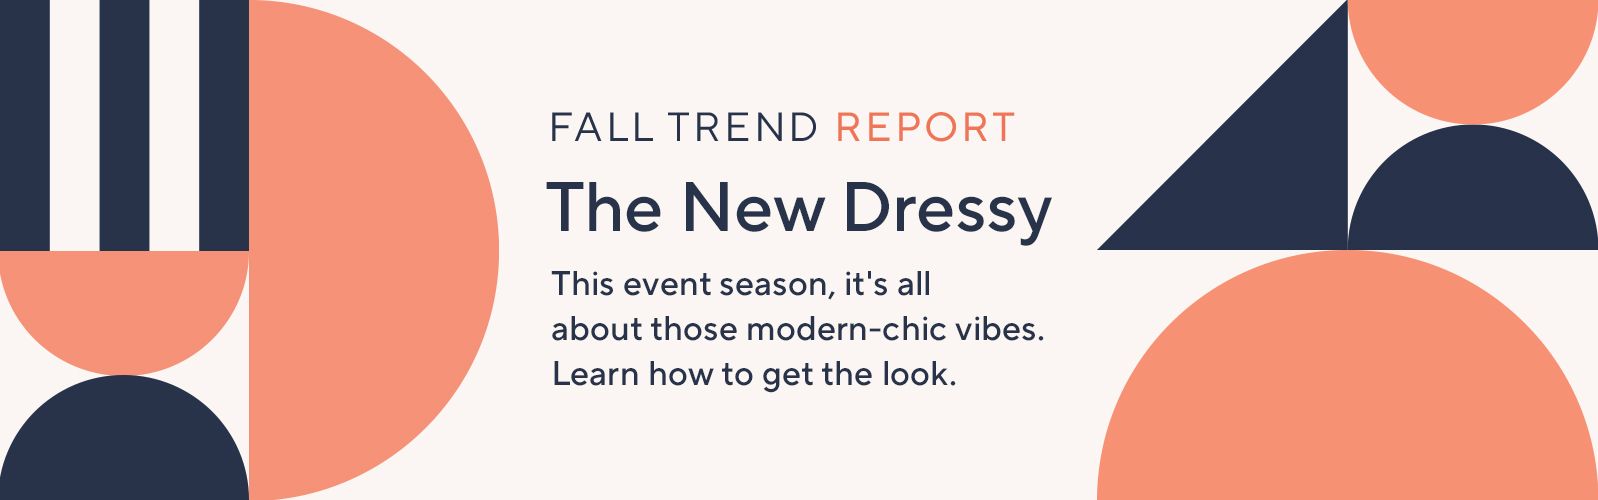 Fall Trend Report: The New Dressy- This event season, it's all about those modern-chic vibes. Learn how to get the look.